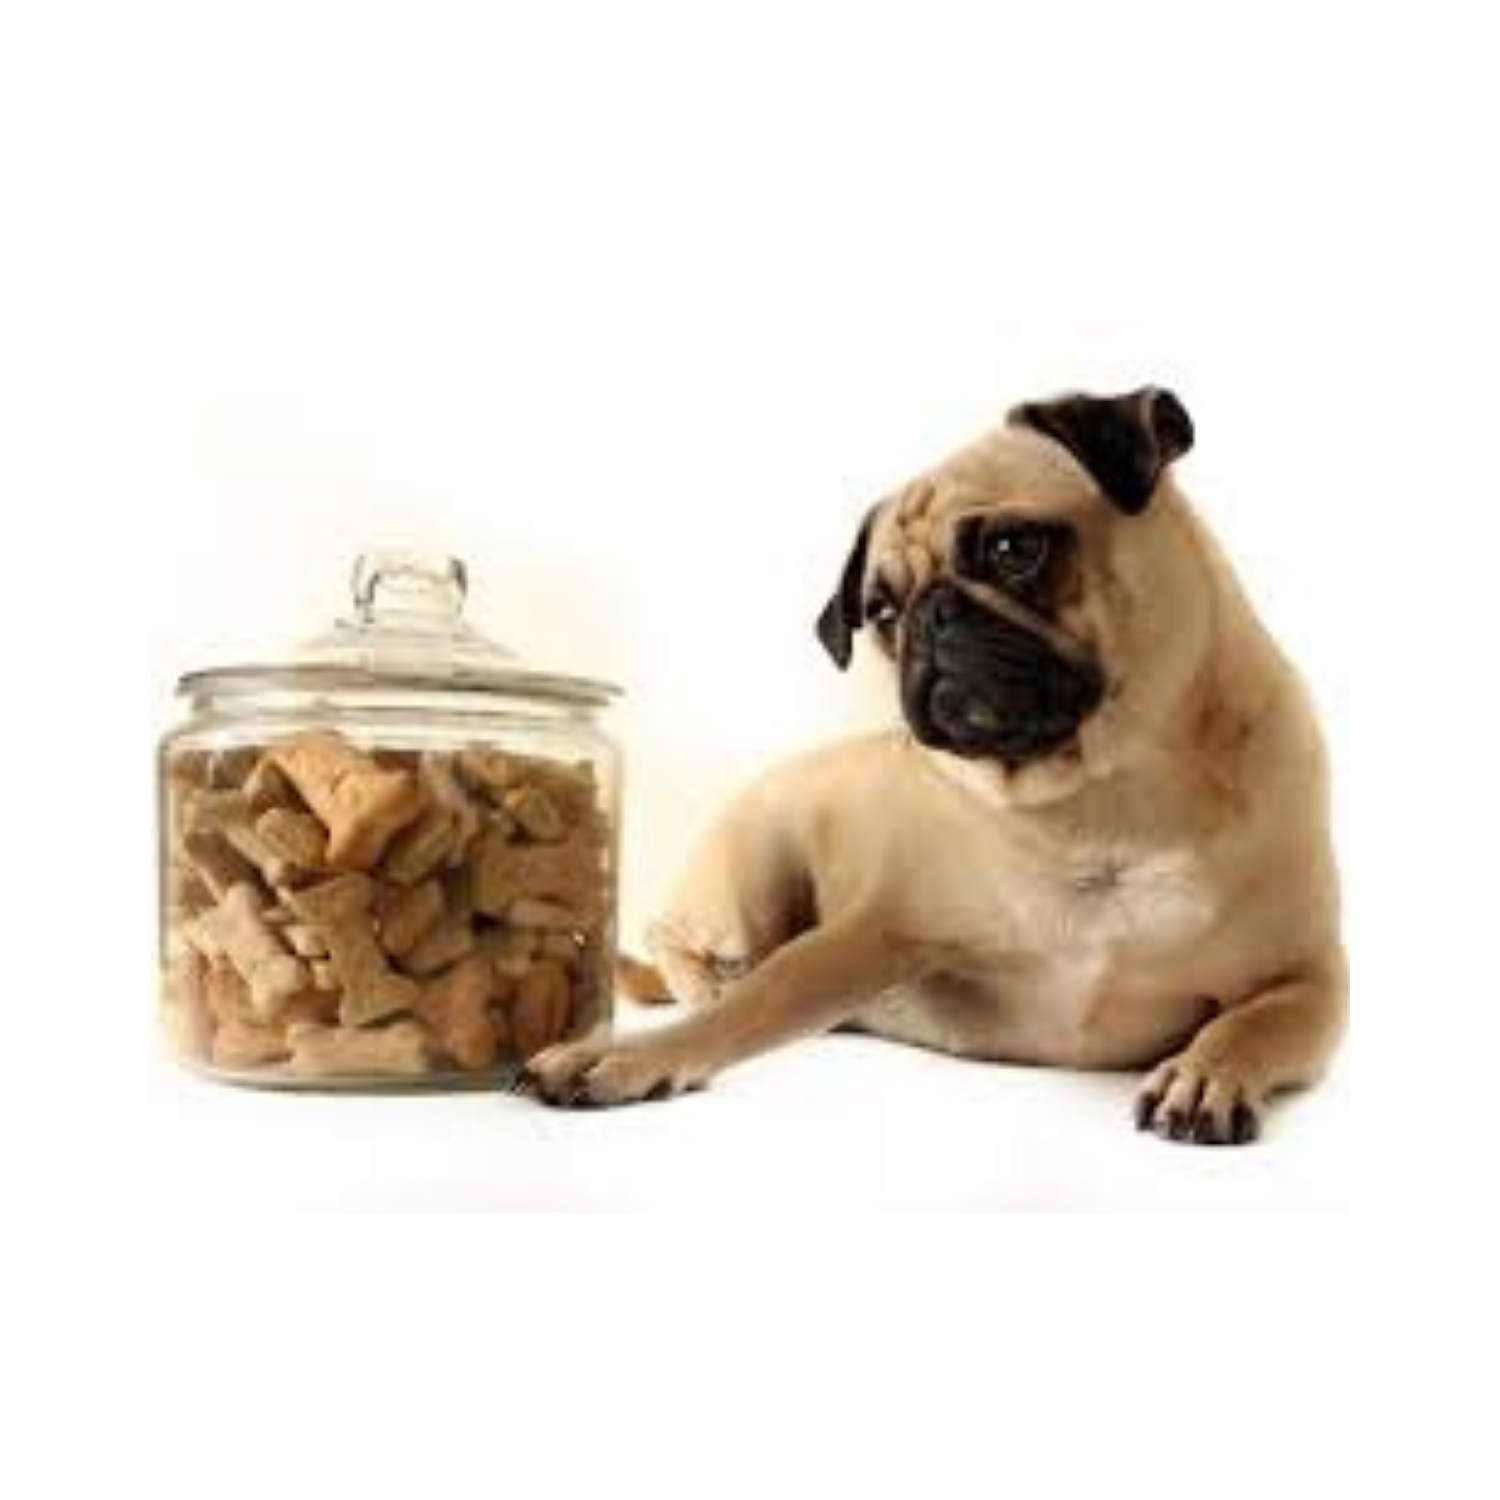 When should you use dog treats?